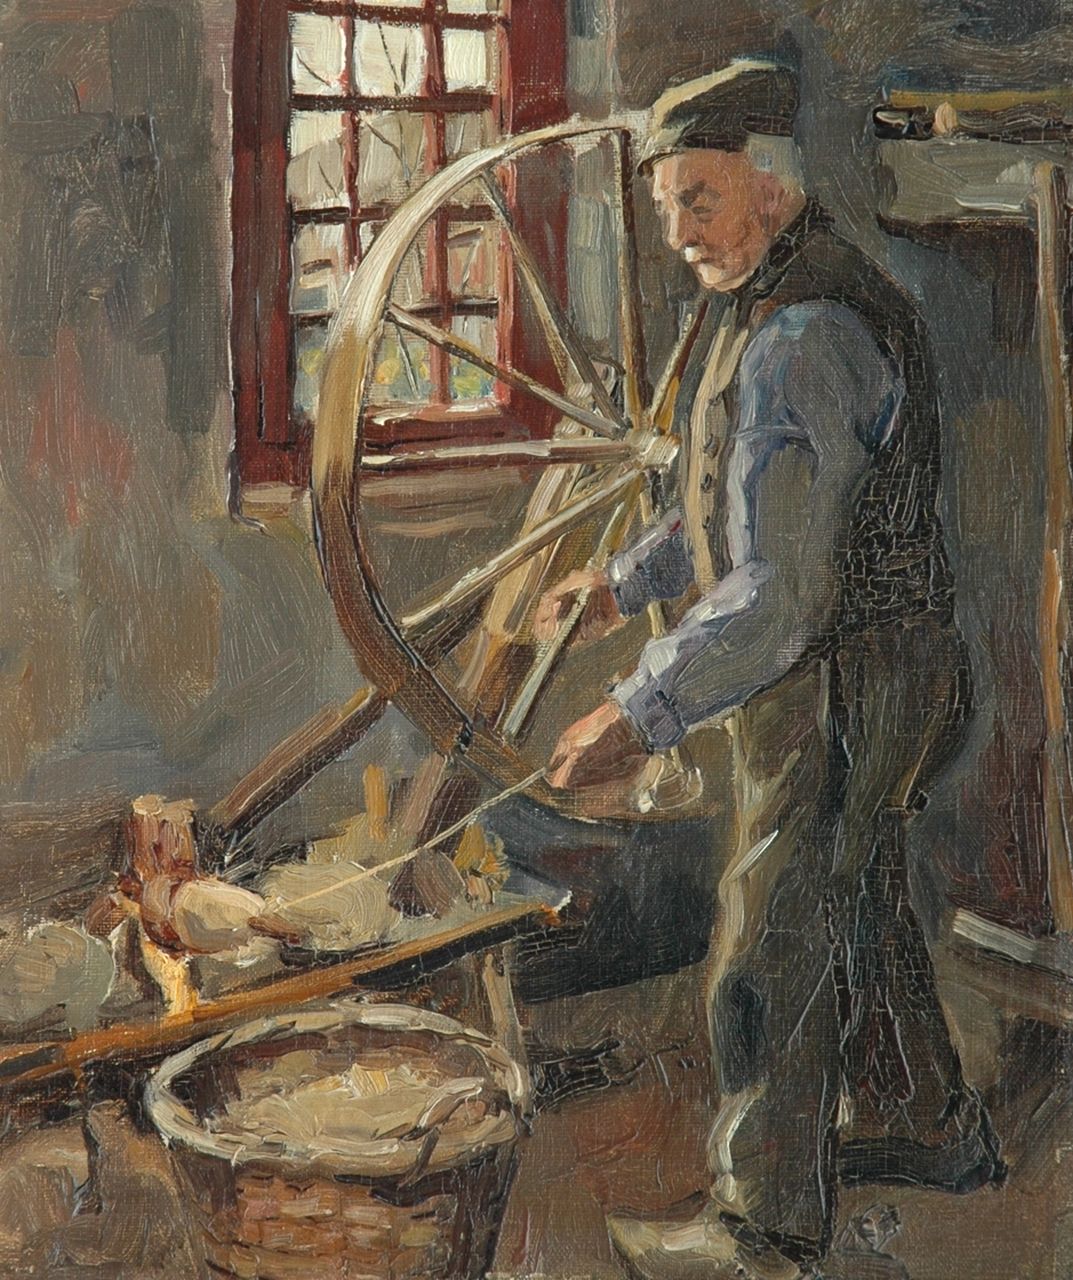 Rappard A.G.A. van | 'Anthon' Gerhard Alexander van Rappard | Paintings offered for sale | Spinning yarn, oil on canvas laid down on board 34.0 x 28.0 cm